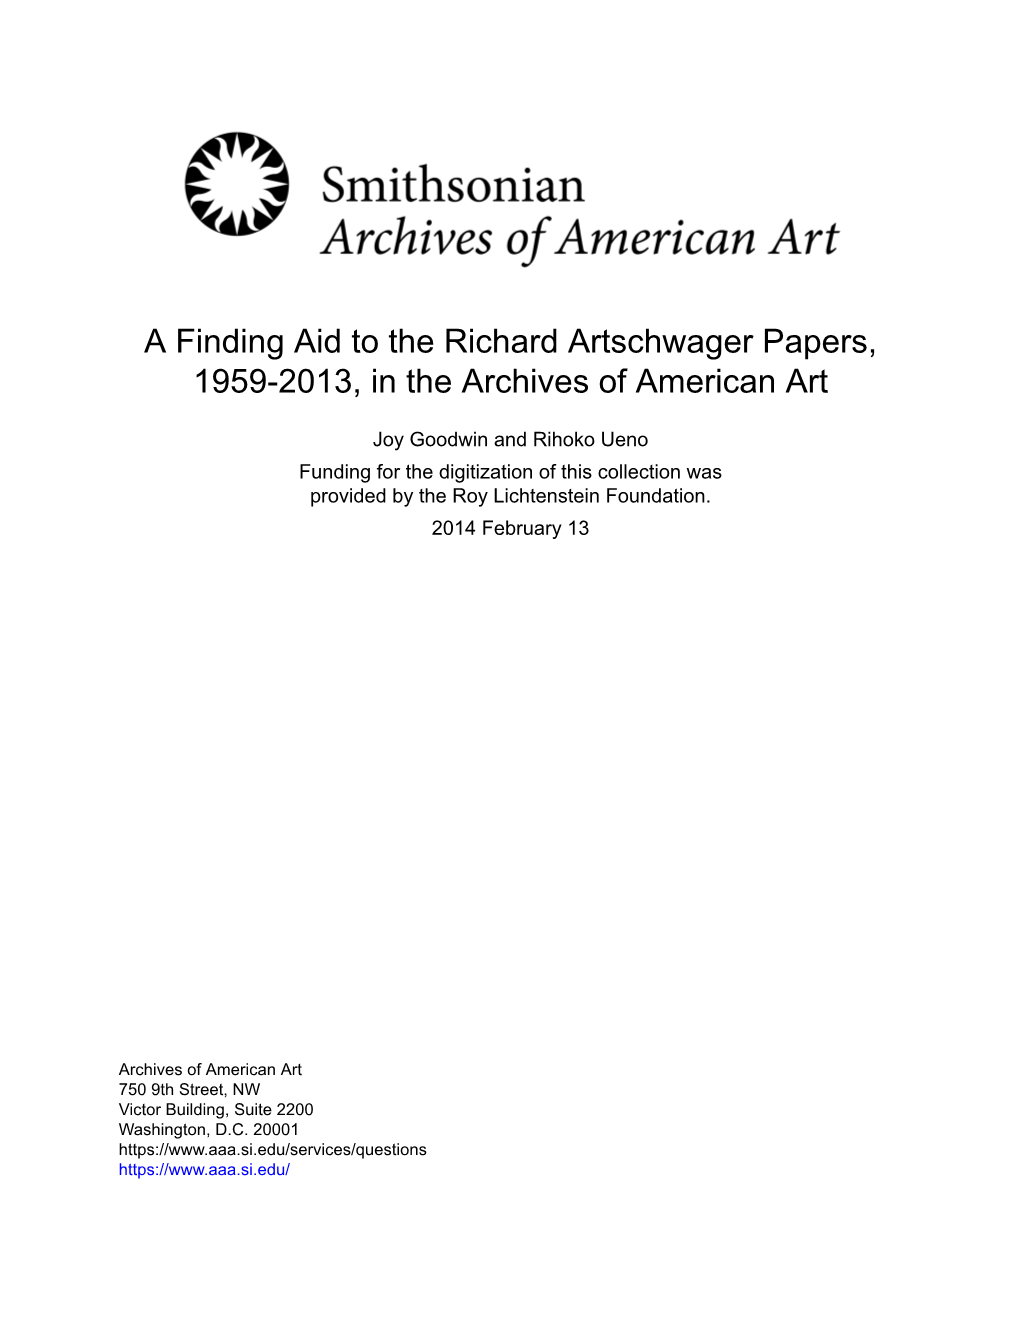 A Finding Aid to the Richard Artschwager Papers, 1959-2013, in the Archives of American Art